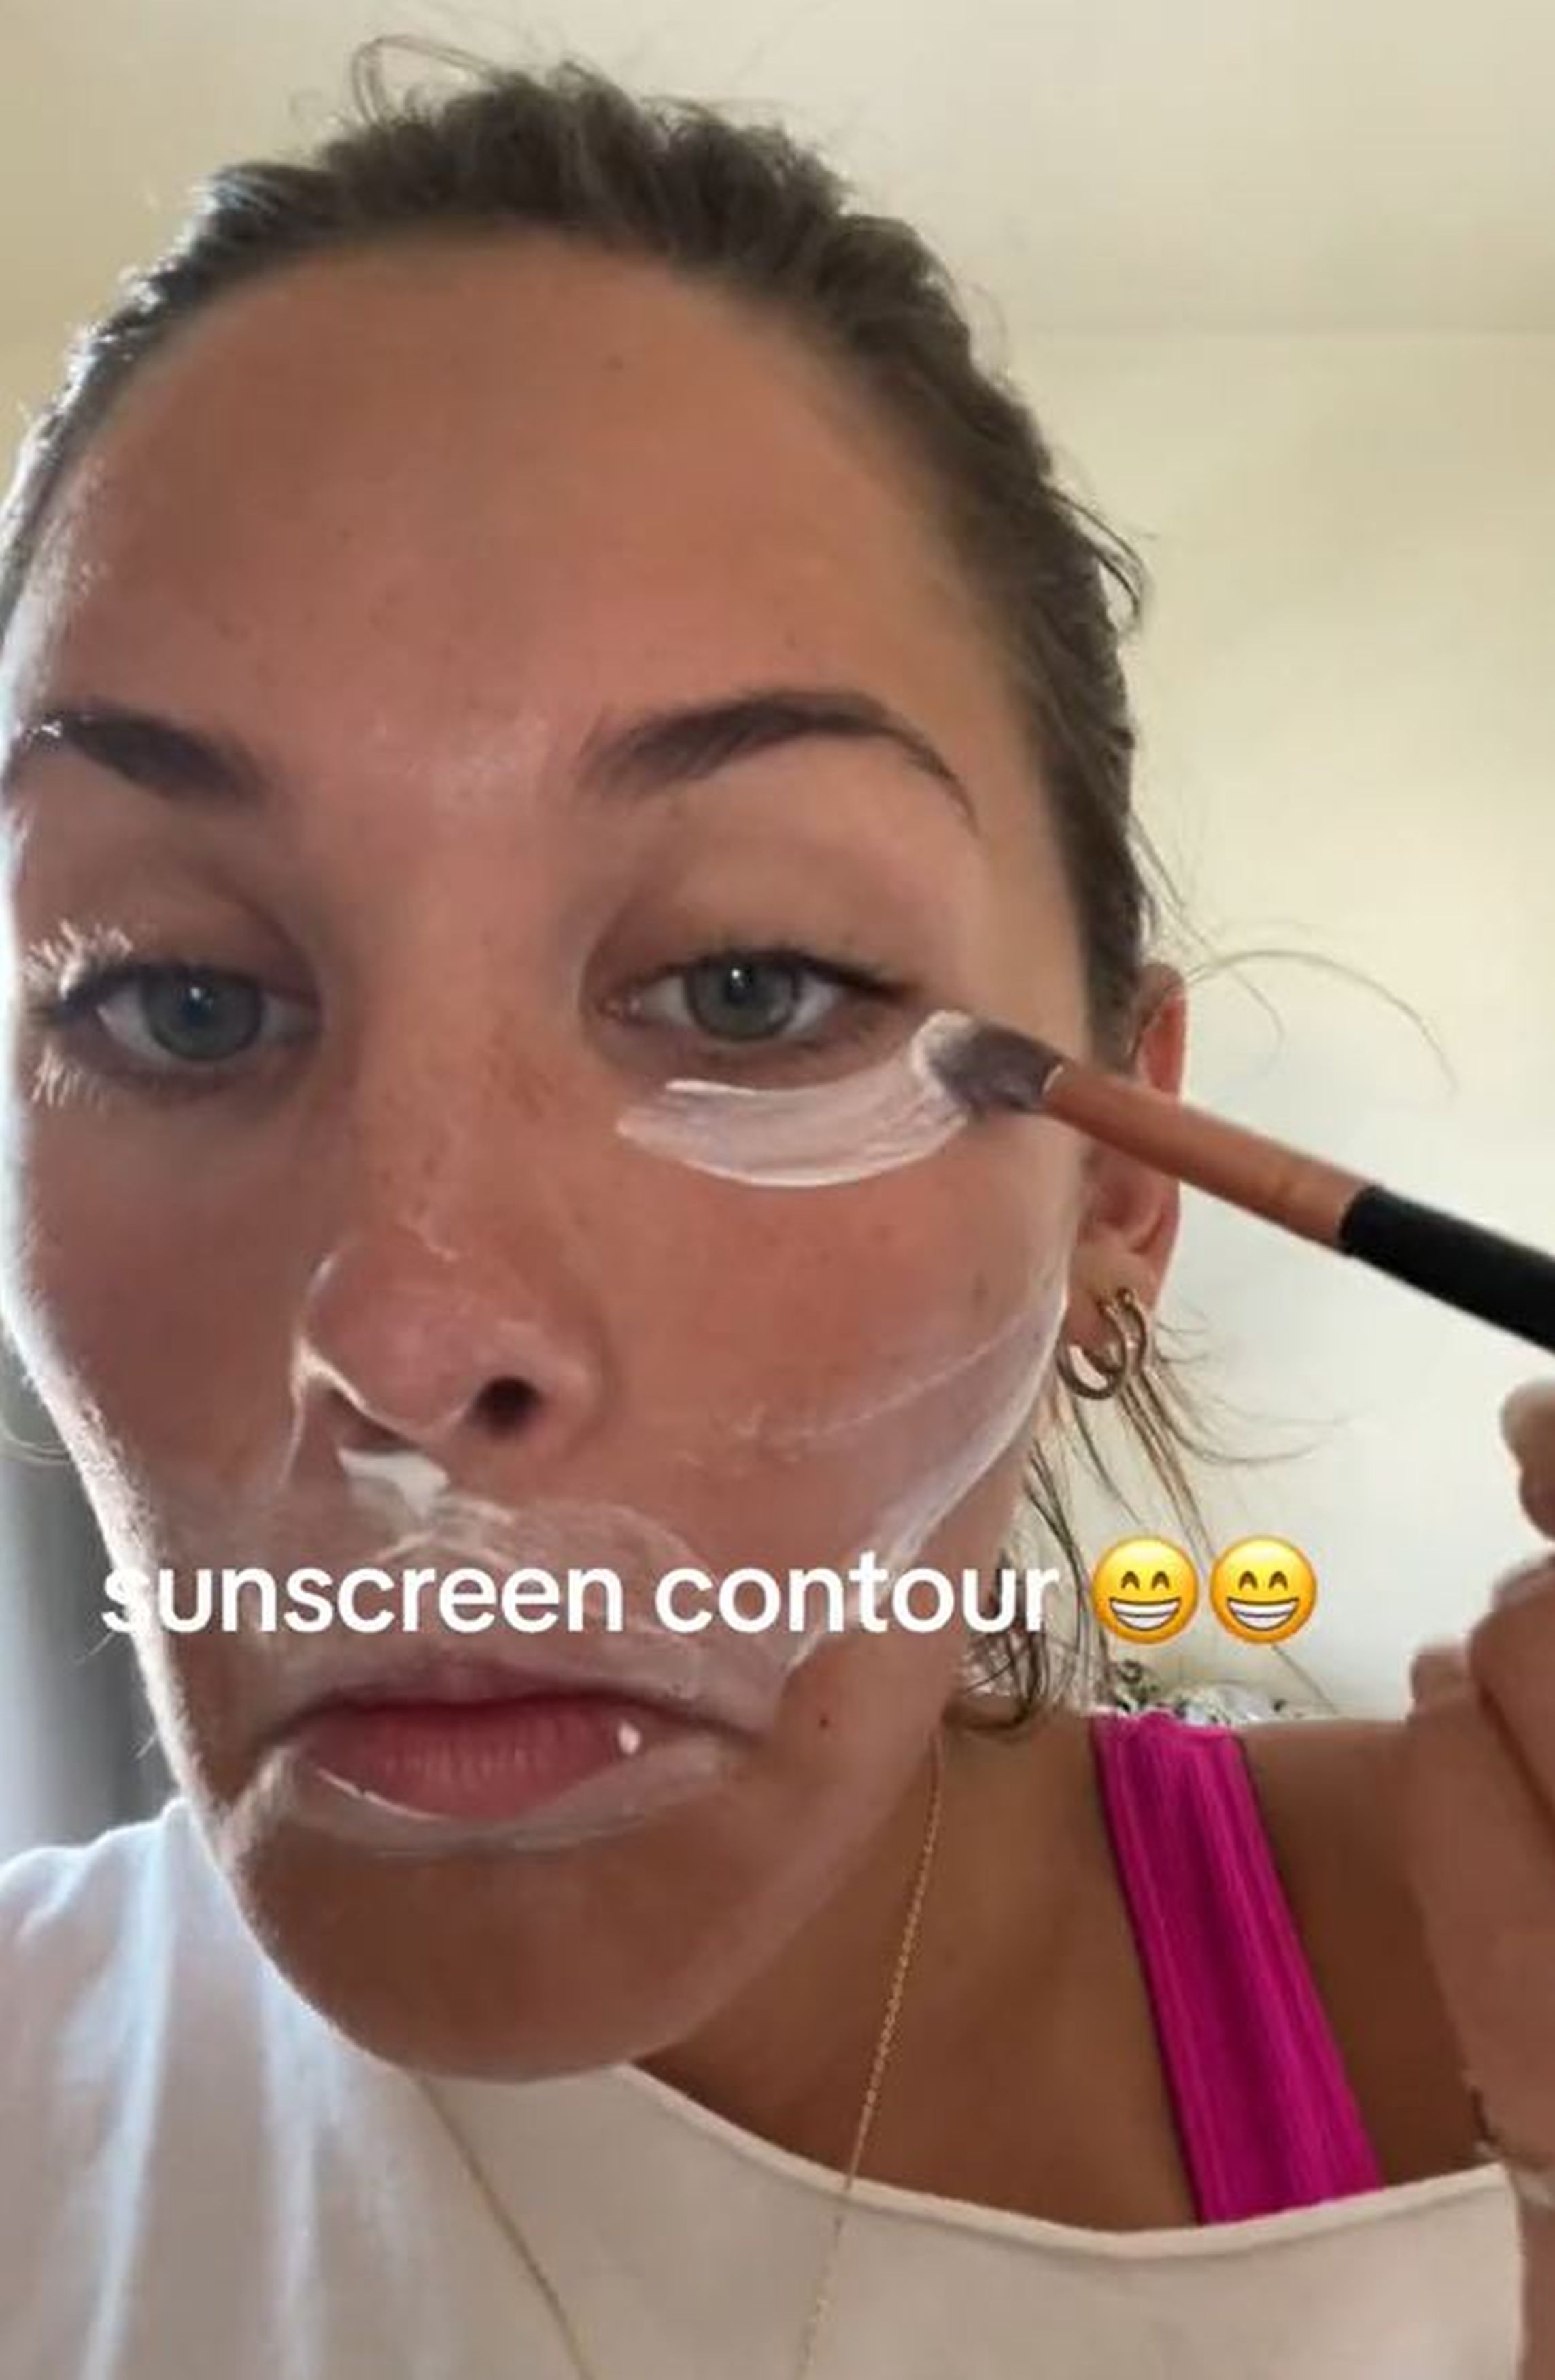 Kratz also shared how she uses a 'lesser SPF' to contour her face